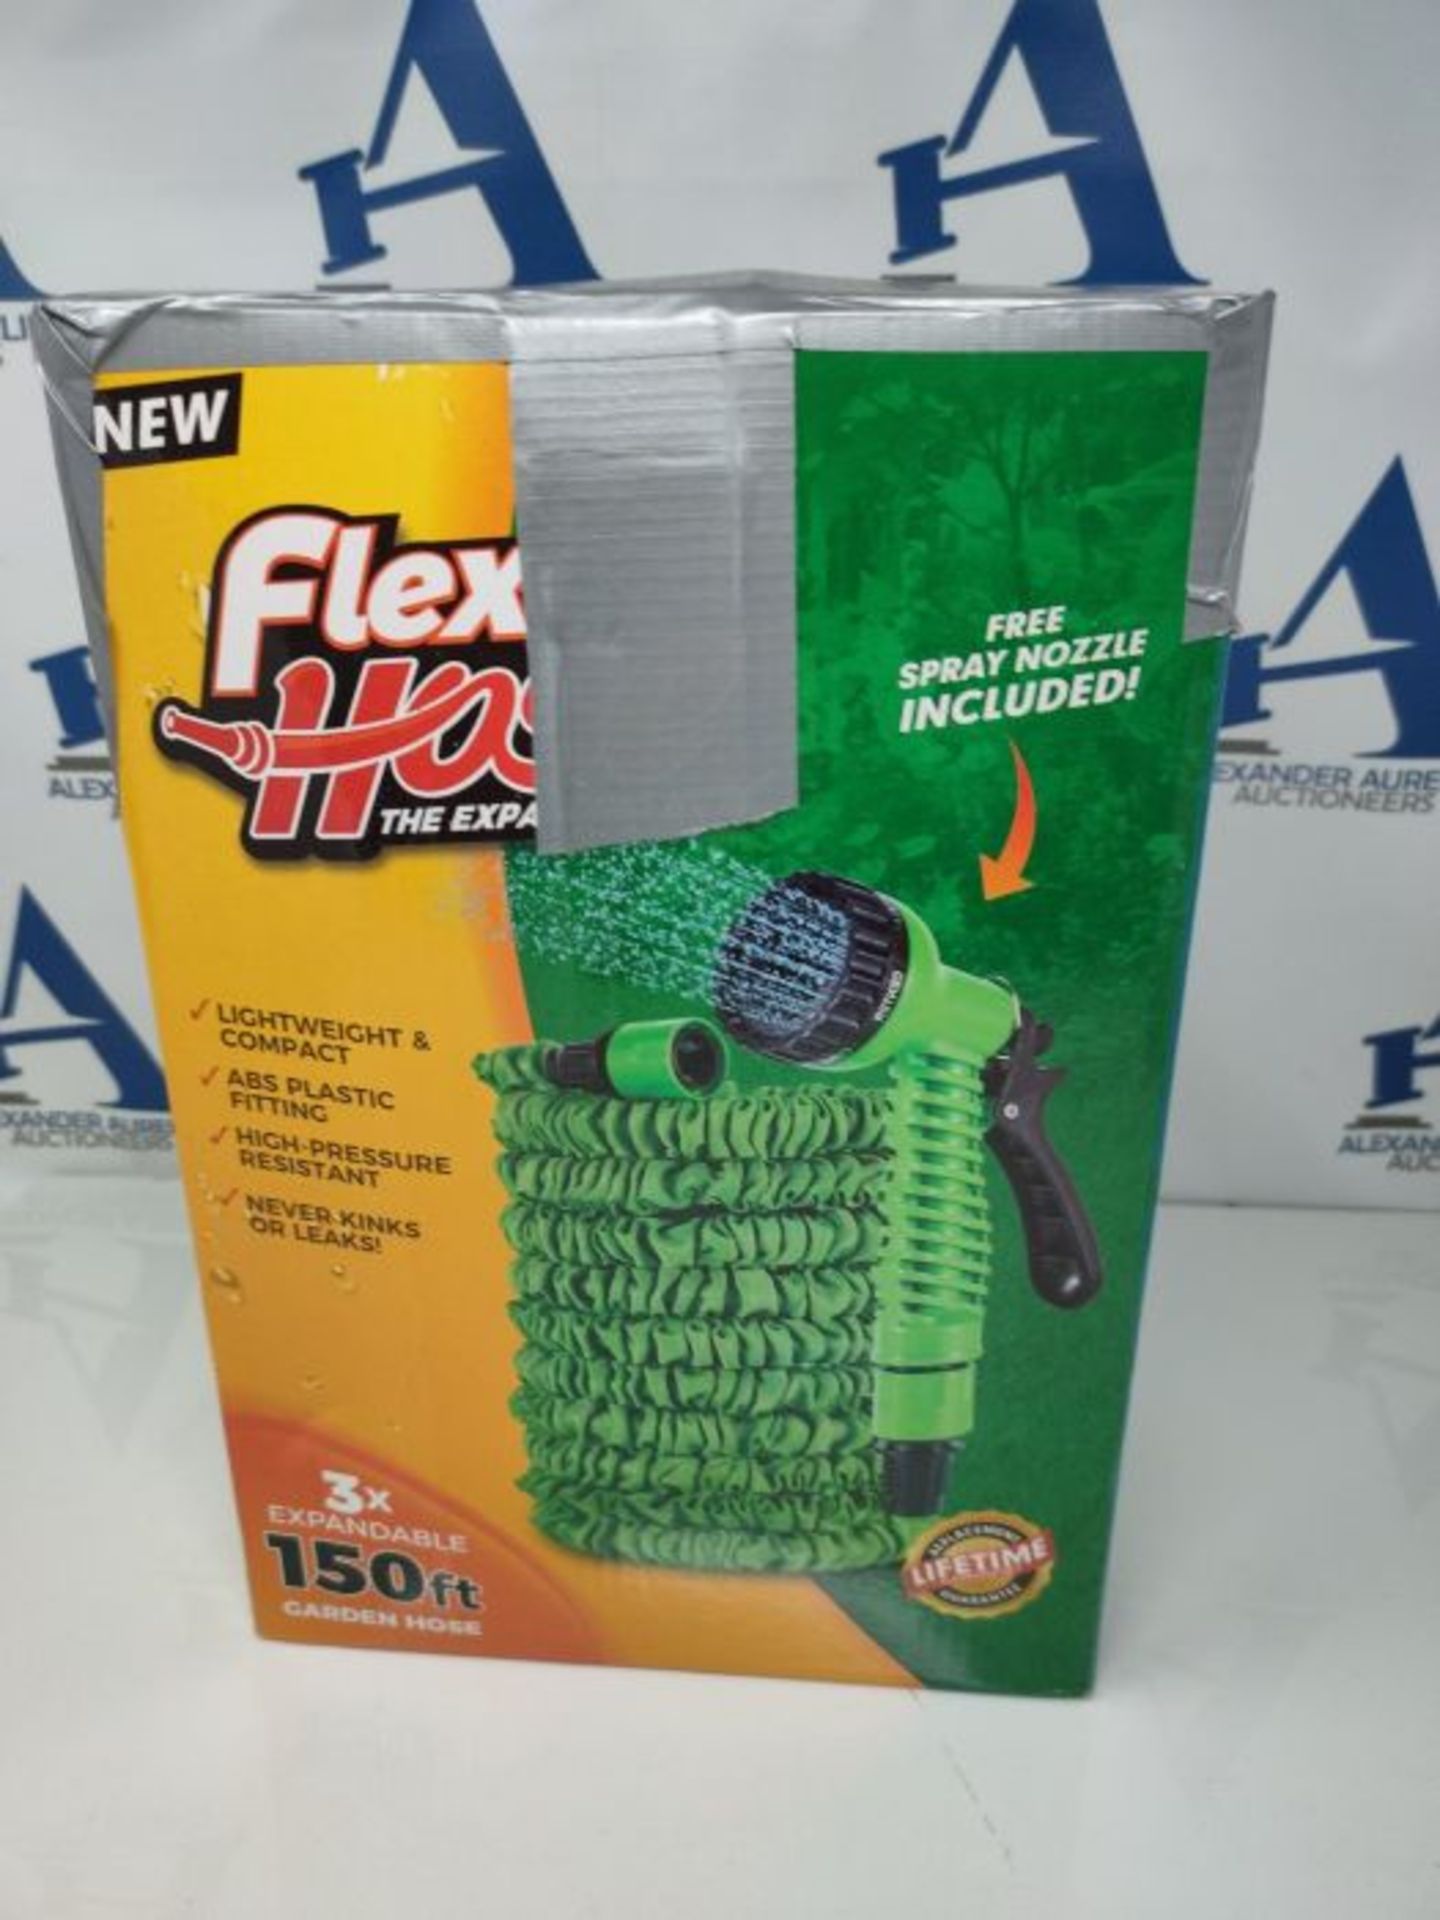 Flexi Hose 150 Foot Expandable Garden Hose with 7 Function Spray Nozzle - Durable Bras - Image 2 of 3